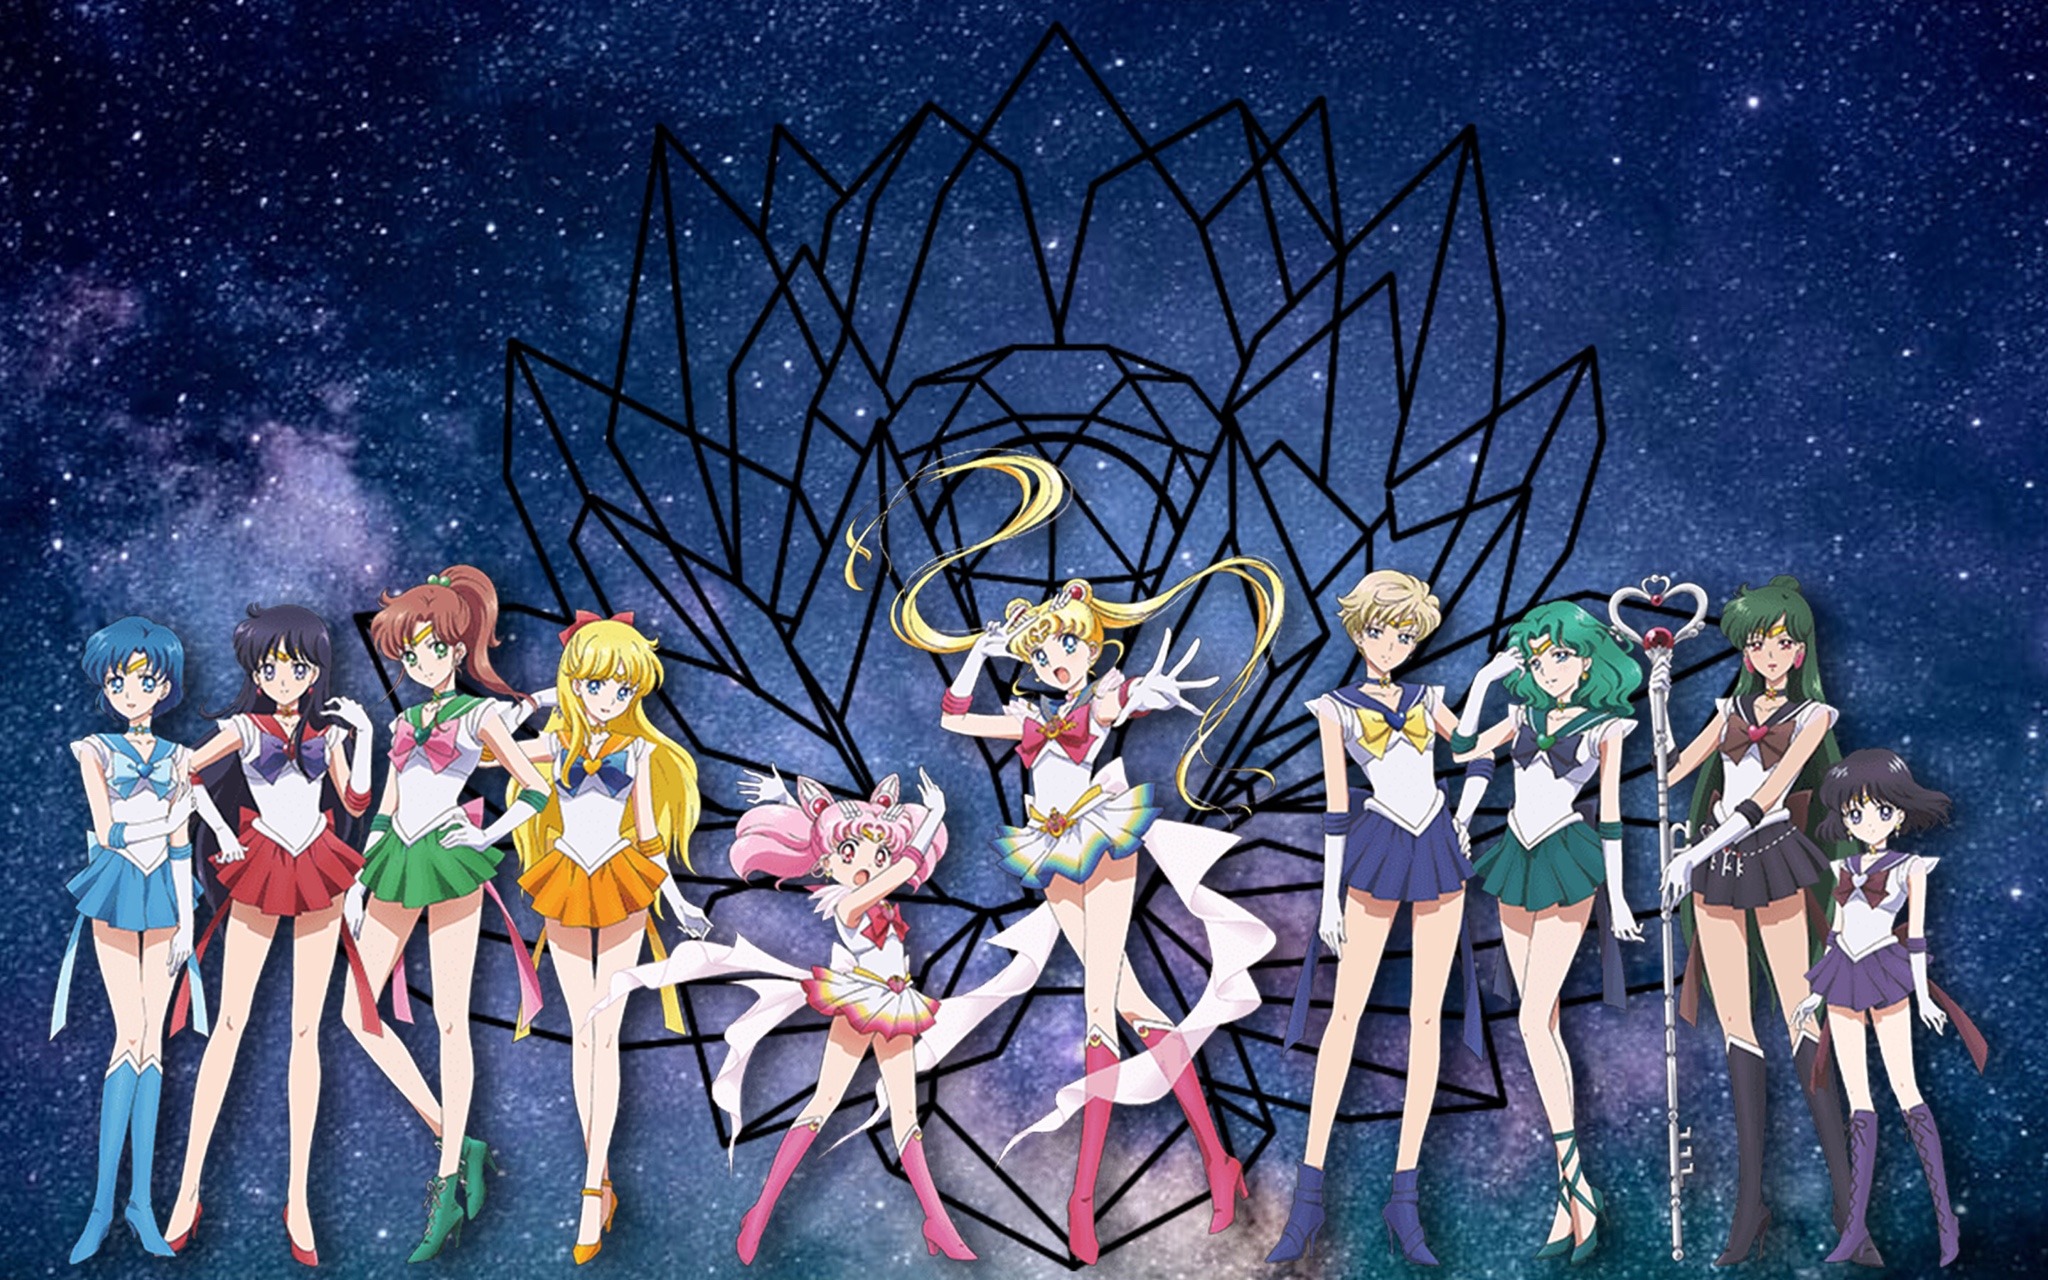 Sailor Moon Wallpaper On Tumblr All sizes · large and better · only very large sort: sailor moon wallpaper on tumblr